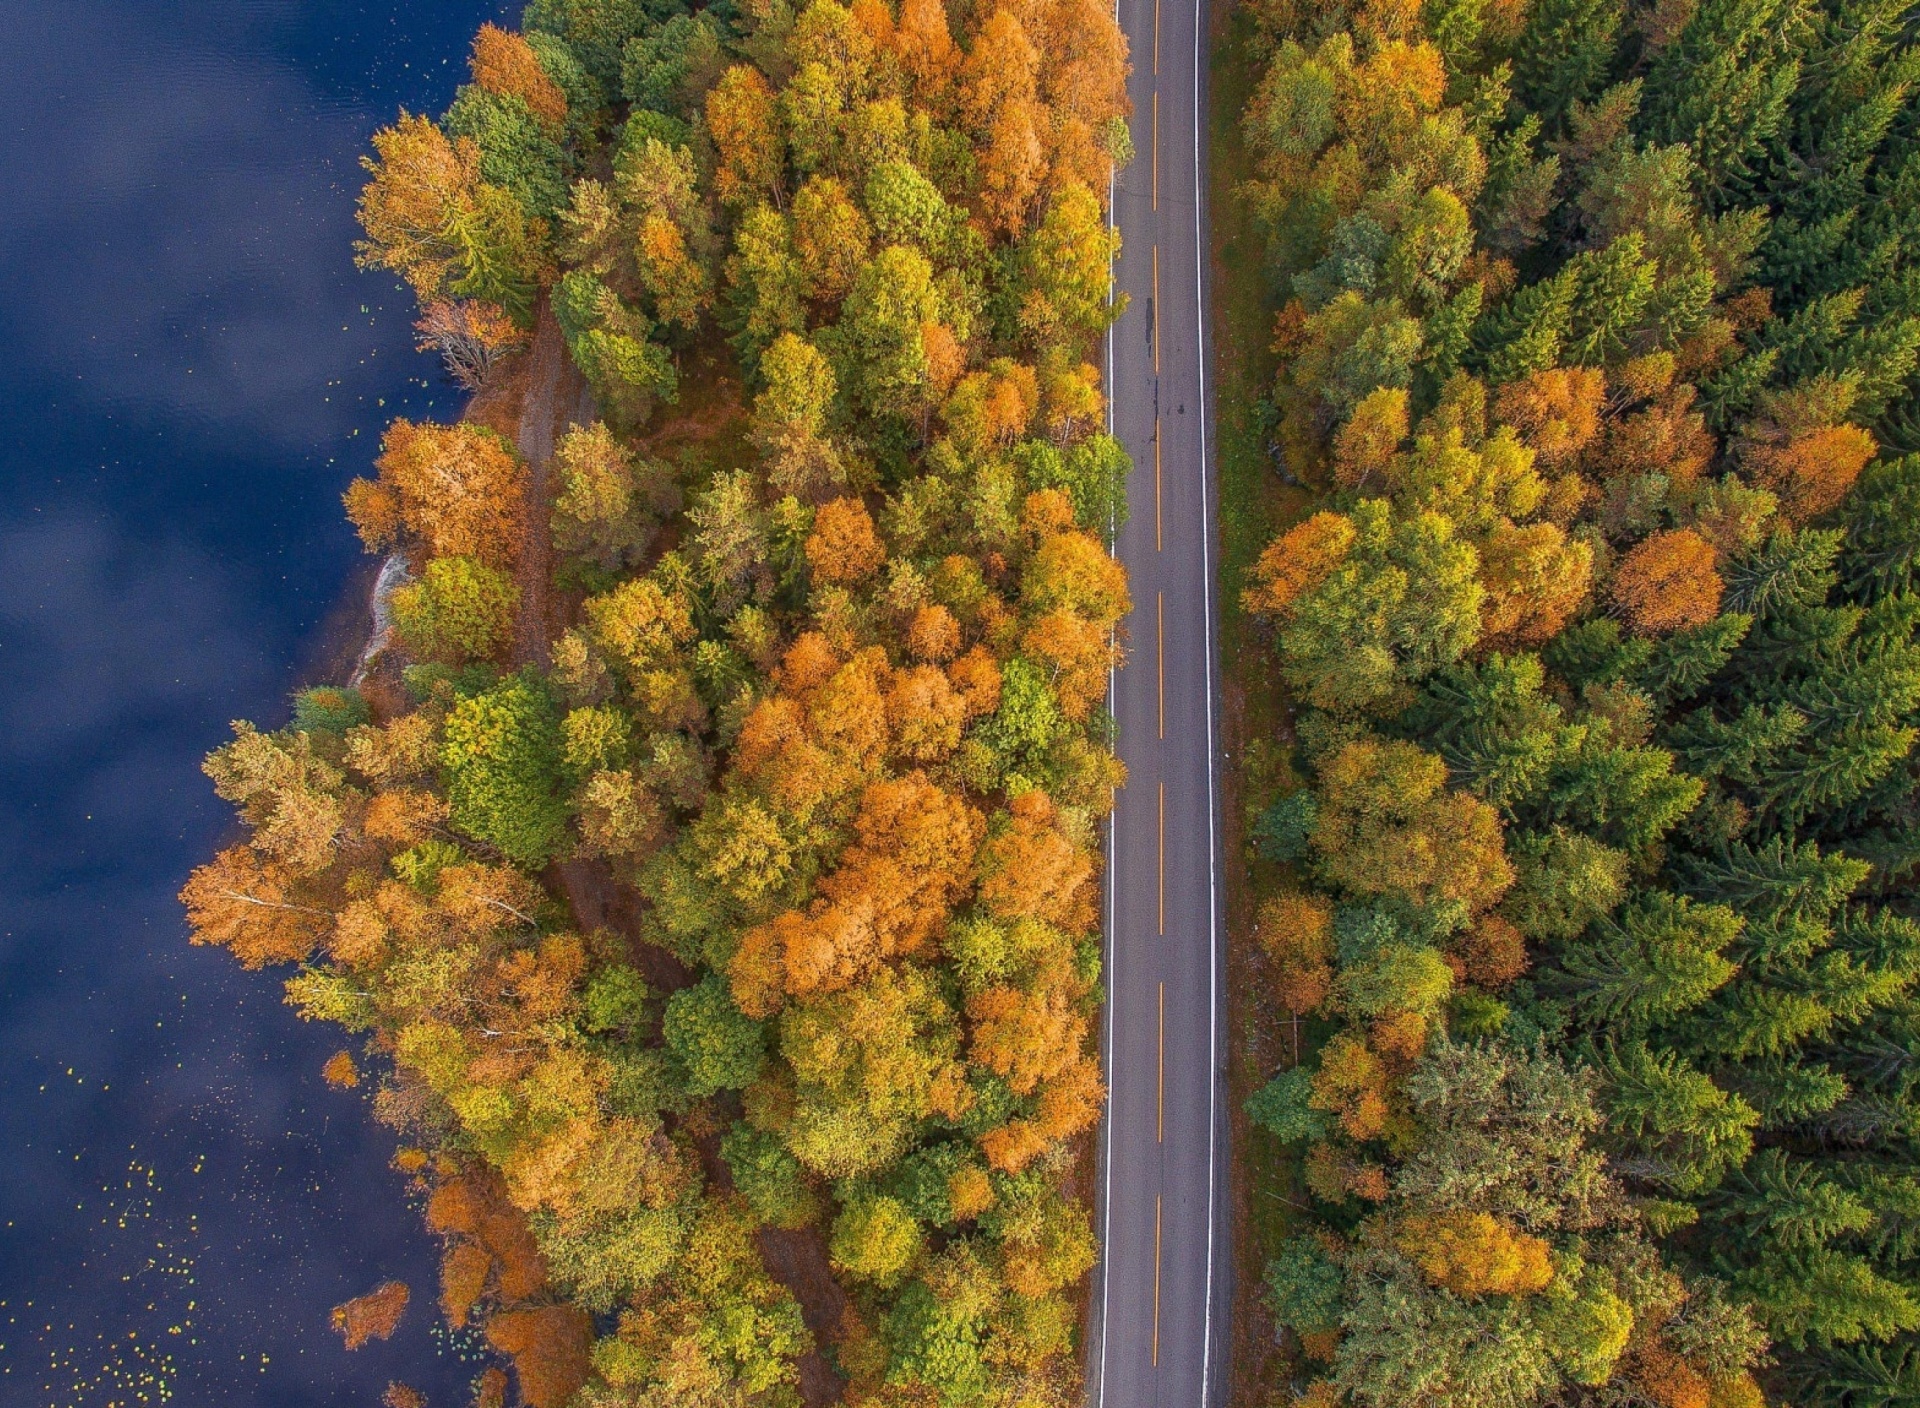 Drone photo of autumn forest screenshot #1 1920x1408